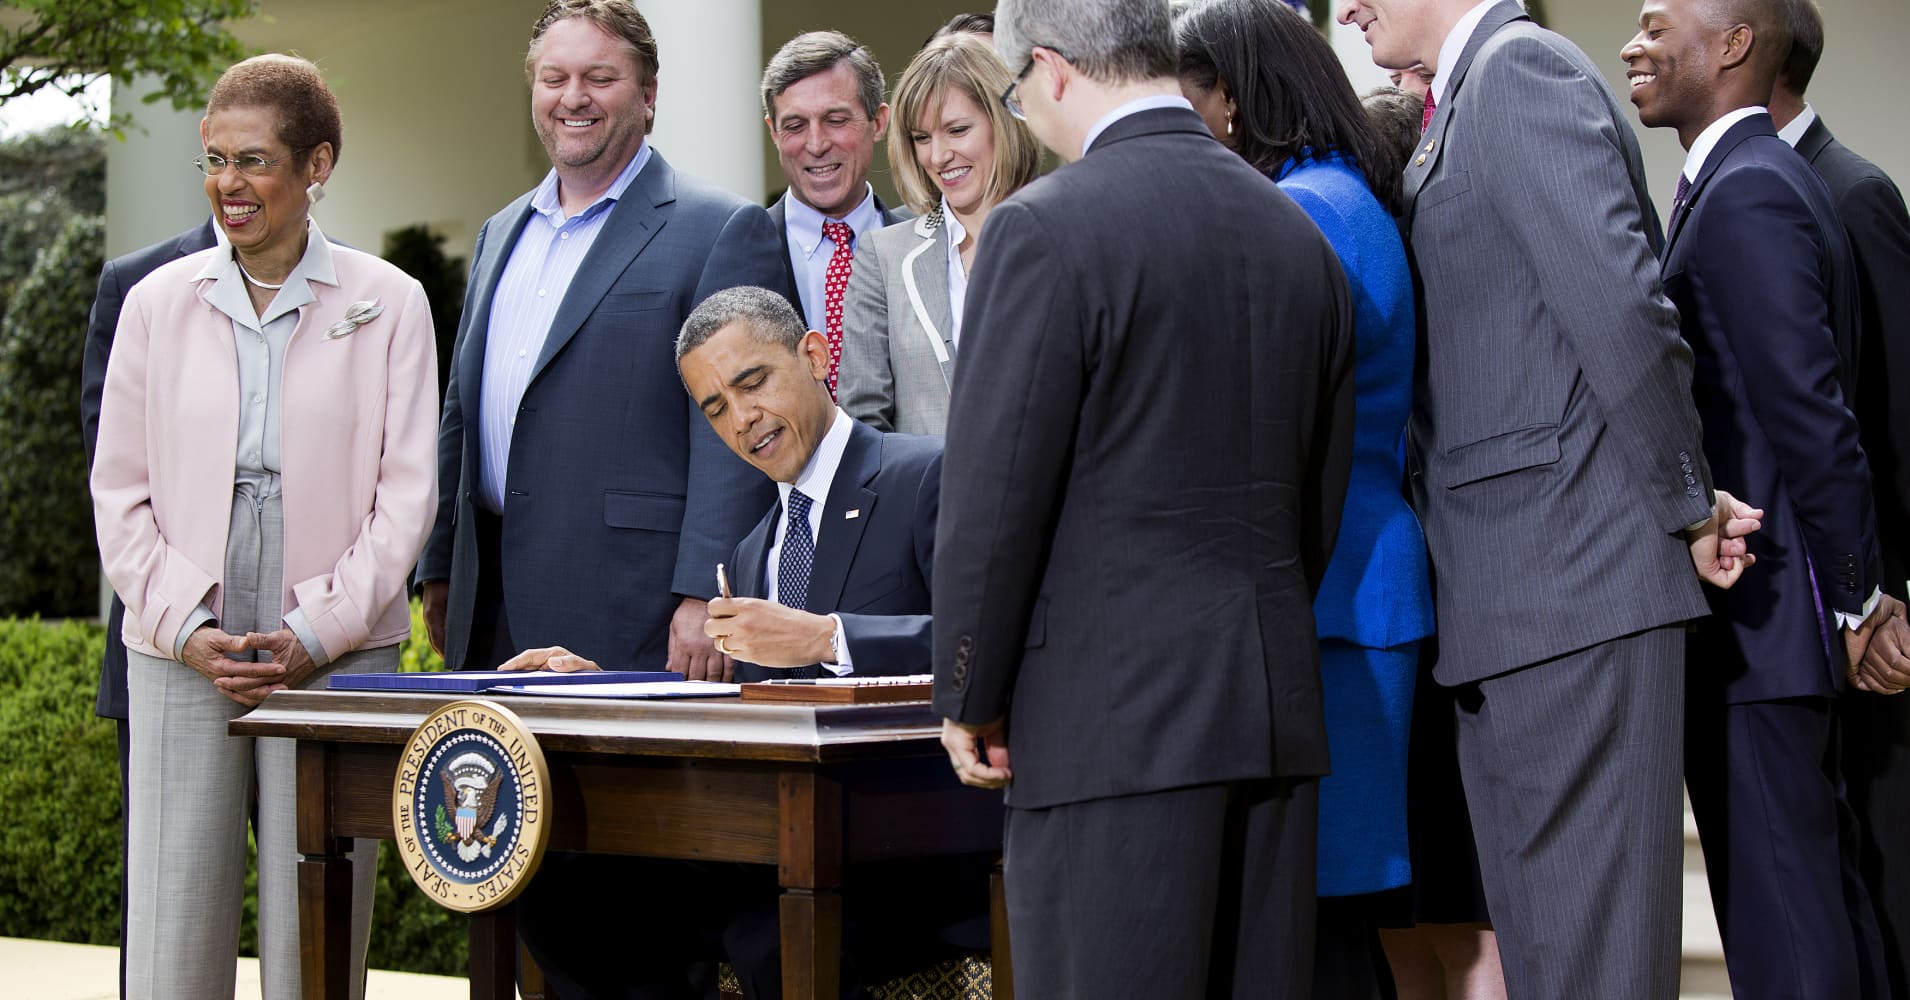 President Barack Obama, surrounded by members of Congress and business leaders, signs the Jumpstart Our Business Startups (JOBS) Act in the Rose Garden of the White House on April 5 2012 in Washington, DC.